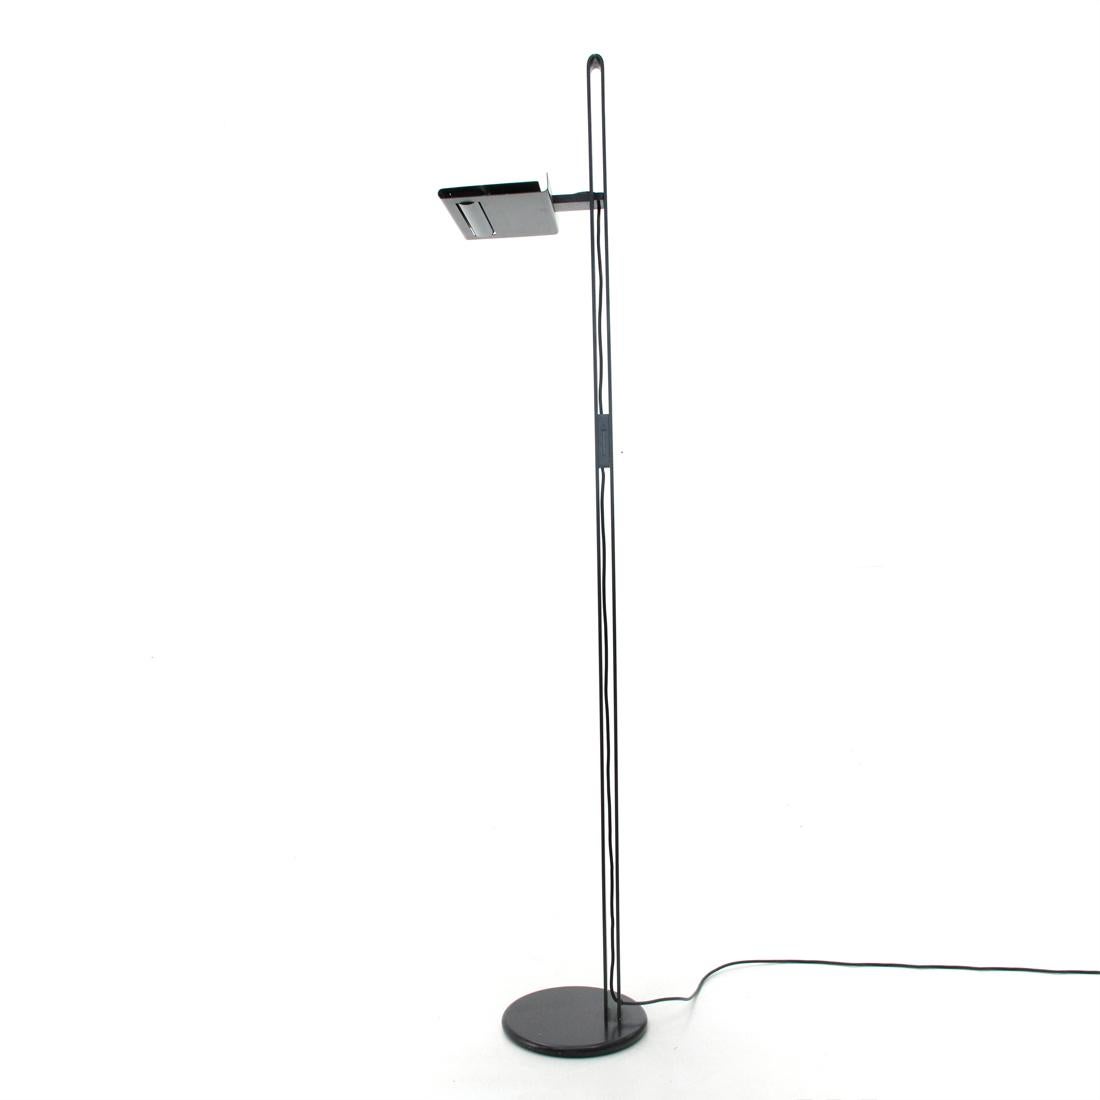 Floor lamp produced by Oluce in the 1970s, designed by Bruno Gecchellin.
Structure in black painted metal.
Diffuser in black painted metal adjustable in height.
Potentiometer for adjusting light intensity.
Mount a halogen light bulb.
Good